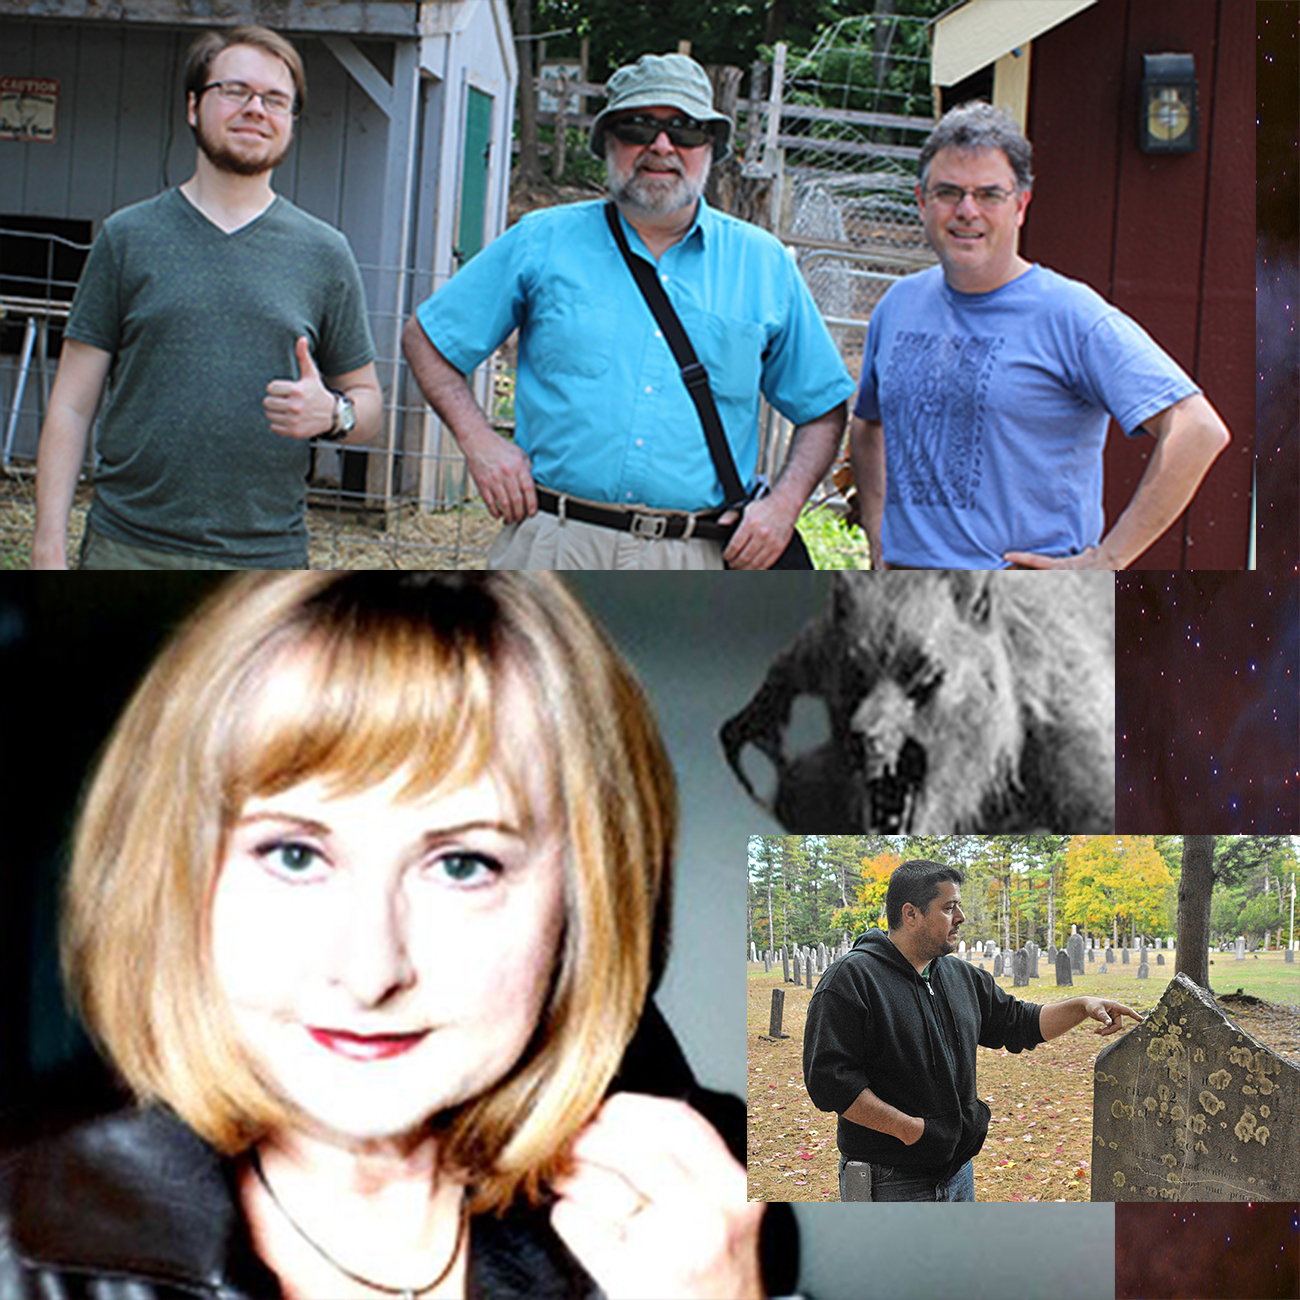 Show #700: July 16, 2017 - 'Two-Hour Special: State of the Paranormal' with Marc Dantonio, Linda Godfrey and Shane Sirois